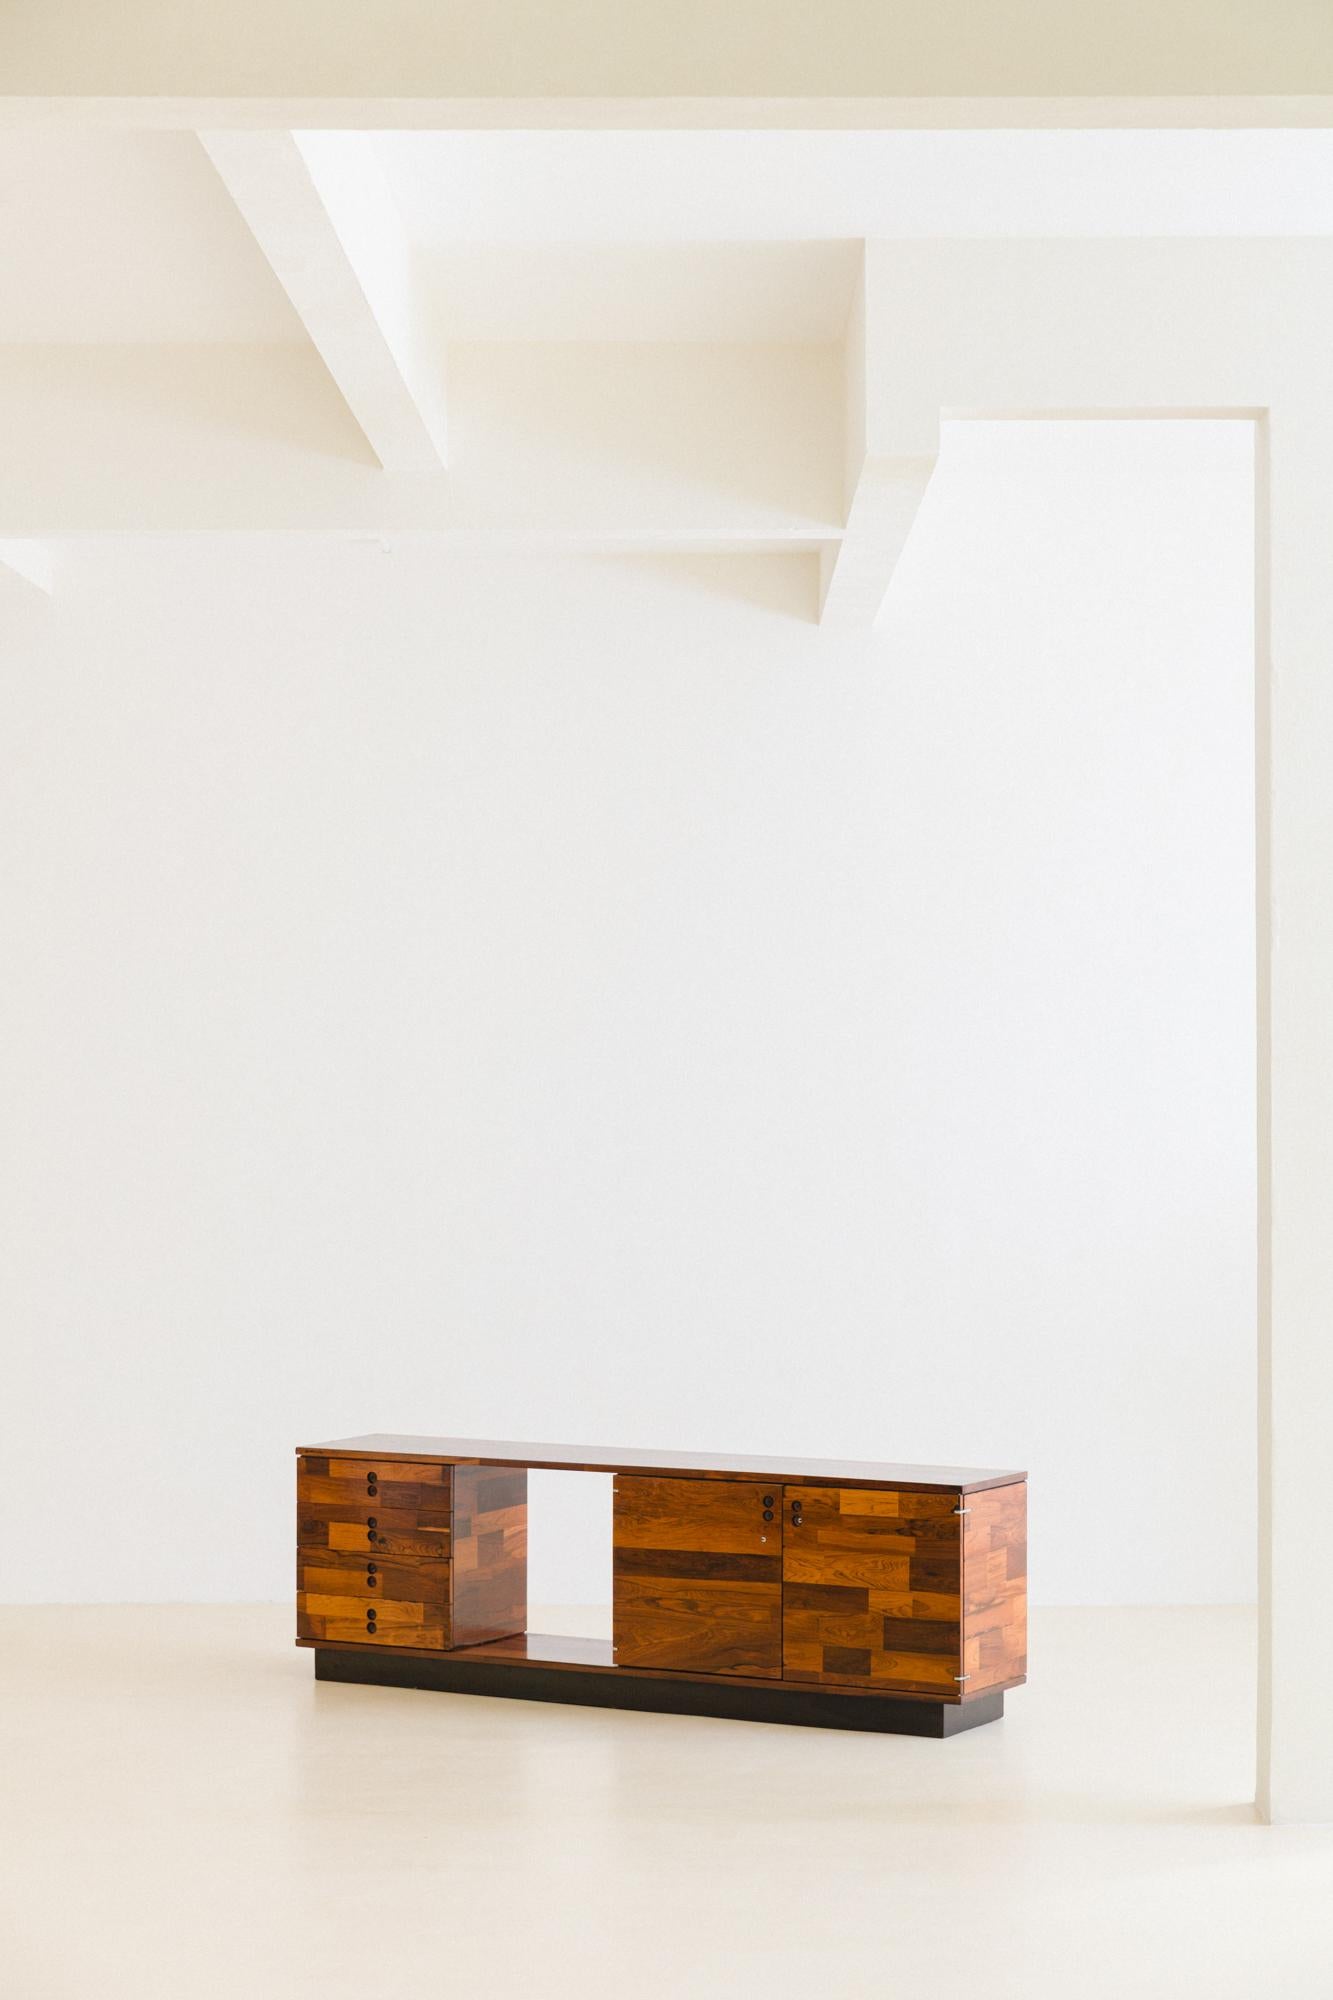 This Rosewood Credenza, designed by Jorge Zalszupin (1922-2020) and manufactured by L'Atelier in the 1960s, is a great way to have the diversity of different tones of Rosewood in just one piece.

Zalszupin's work as a designer, entrepreneur, and